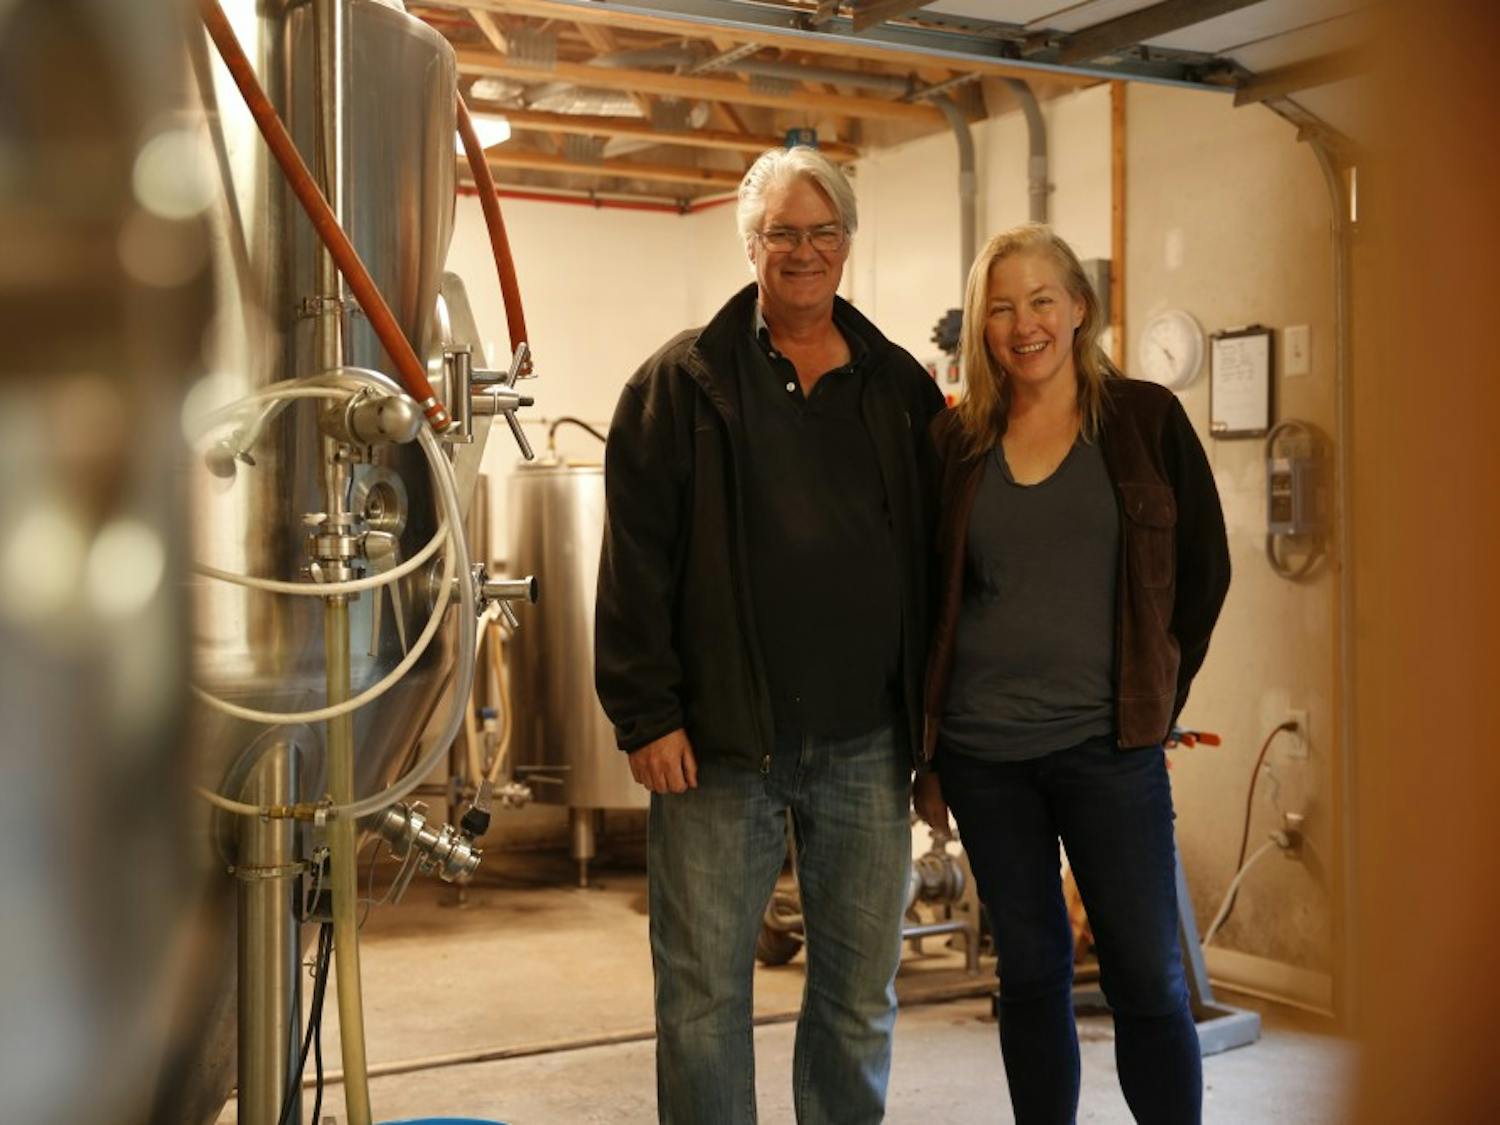 Tim Harper (left) and Beth Boylan (right) are the co-founders of the Durham-based Starpoint Brewery, one of many local breweries in the area growing out of the recent explosion of brewery culture.